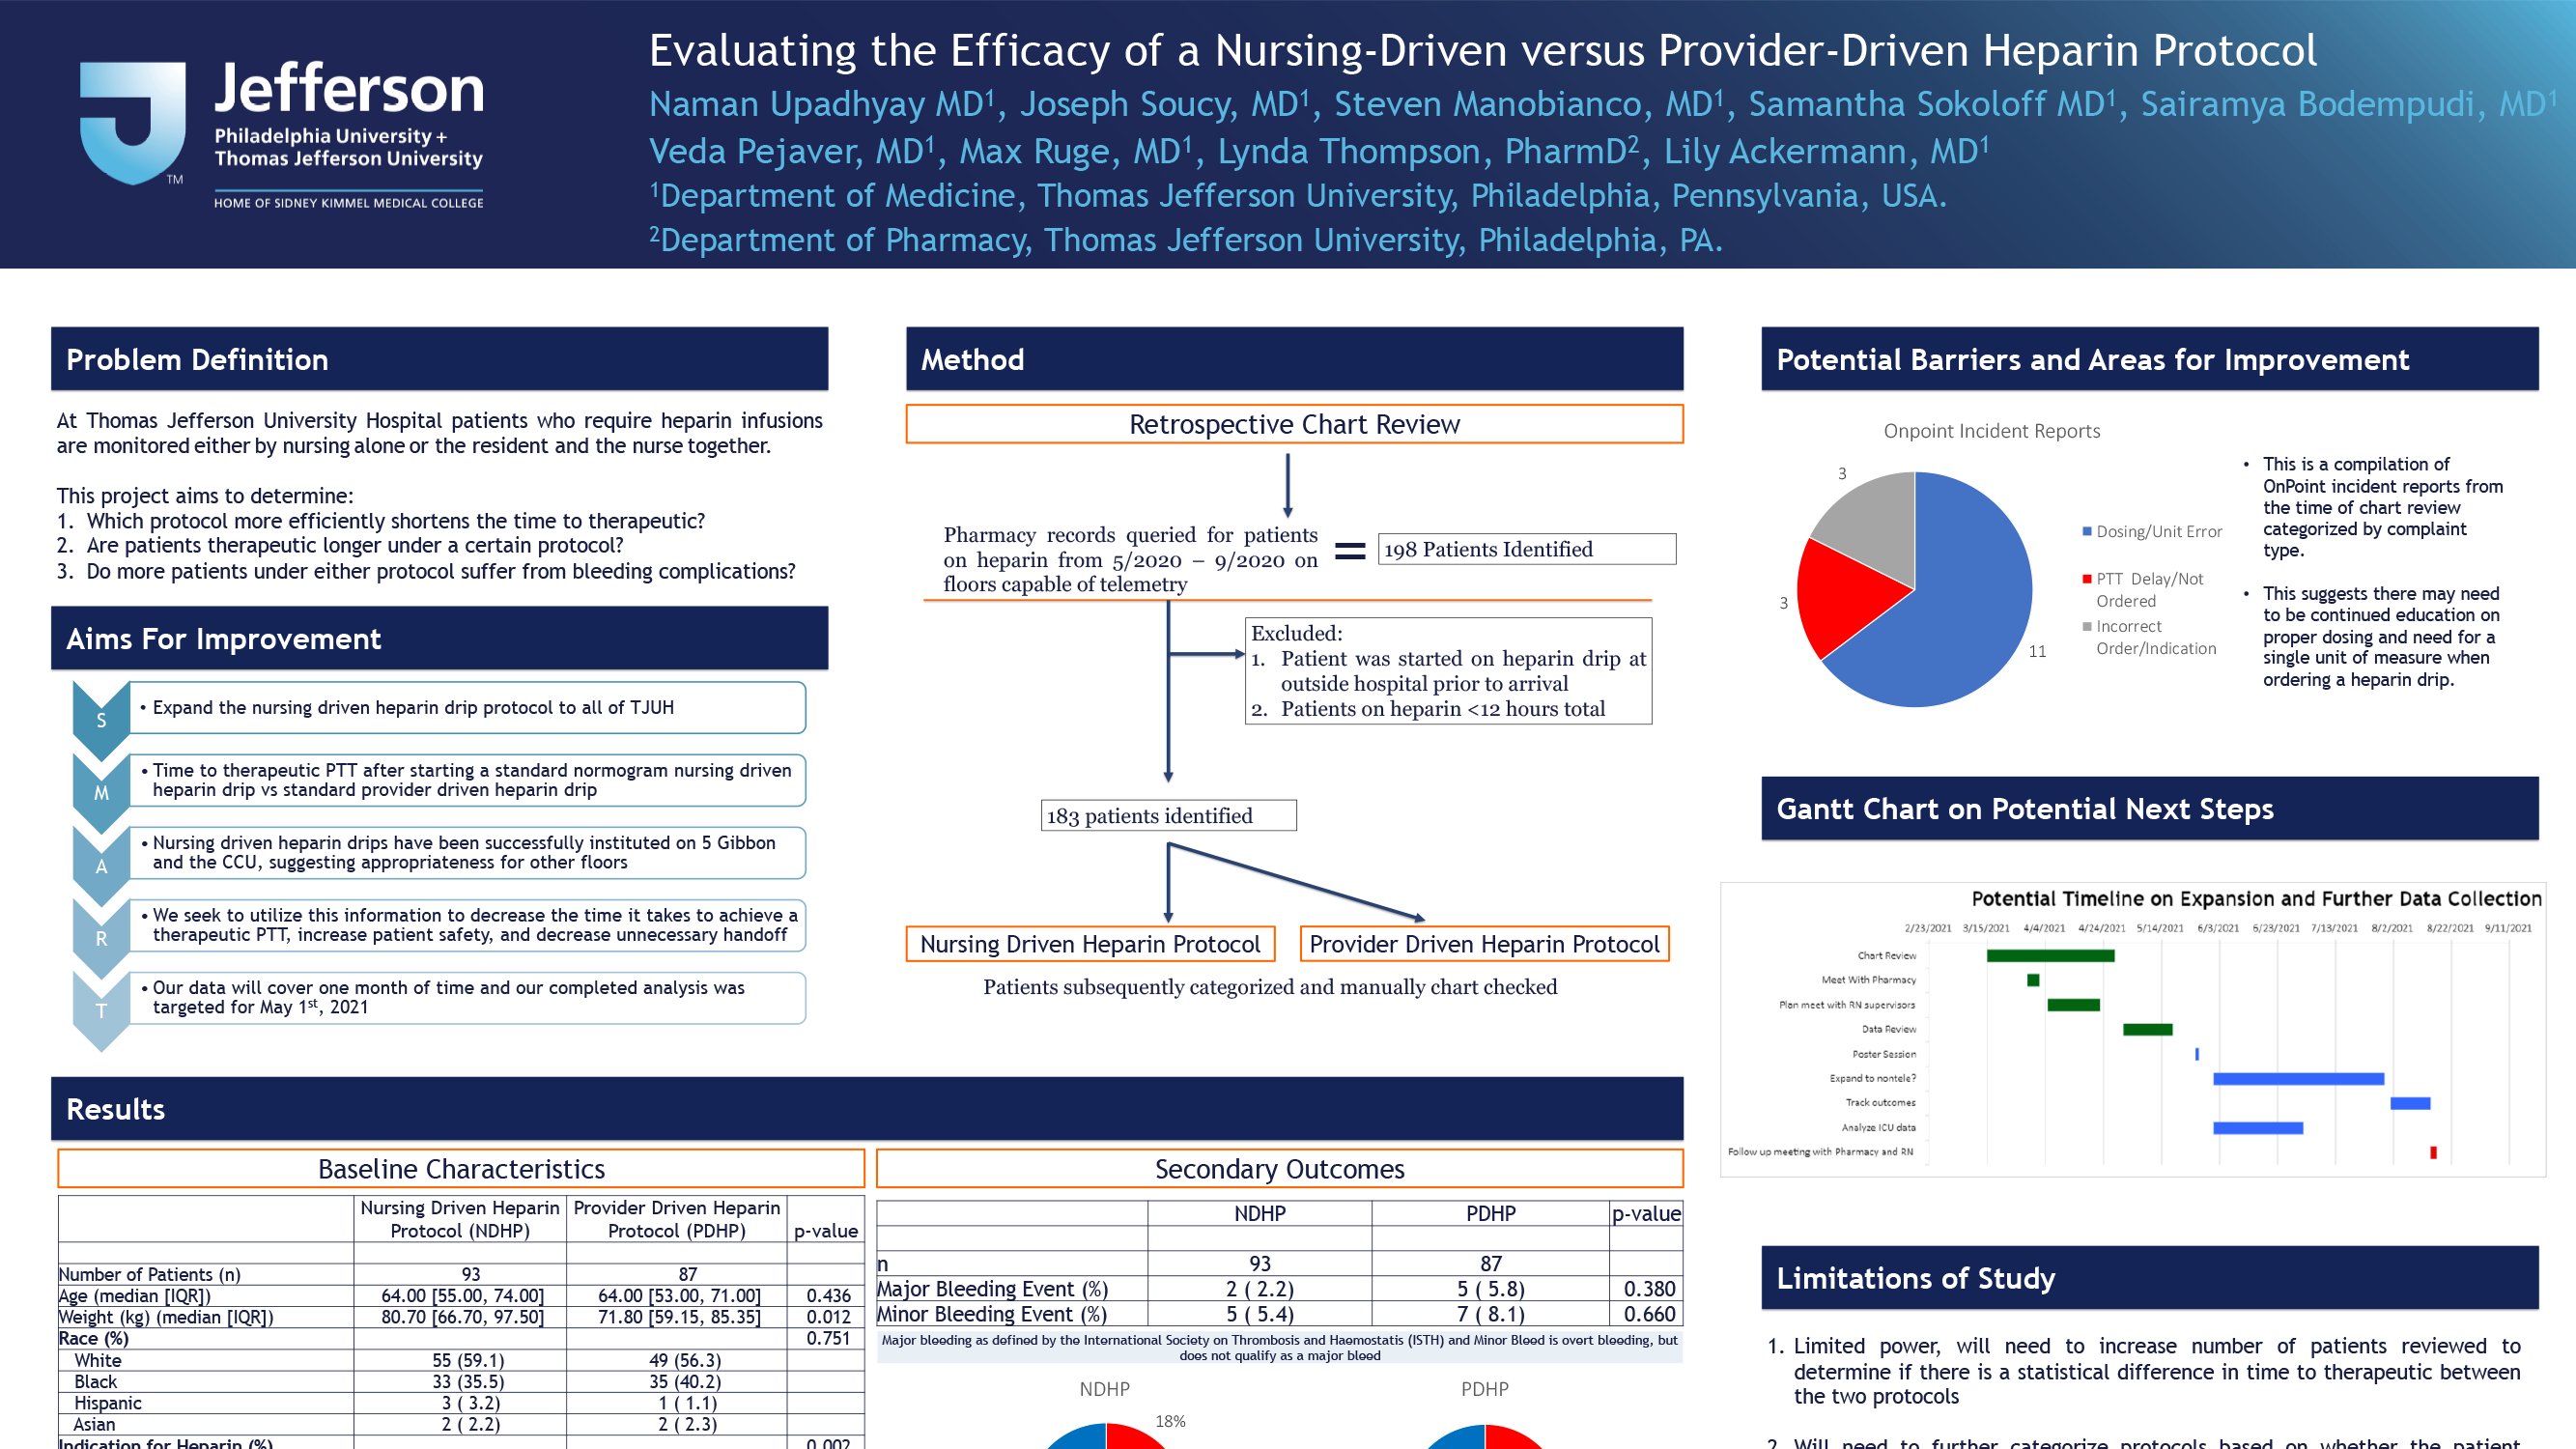 Naman Upadhyay - PAS-37-Evaluating-the-Efficacy-of-a-Nursing-Driven-versus-Provider-Driven-Heparin-Protocol